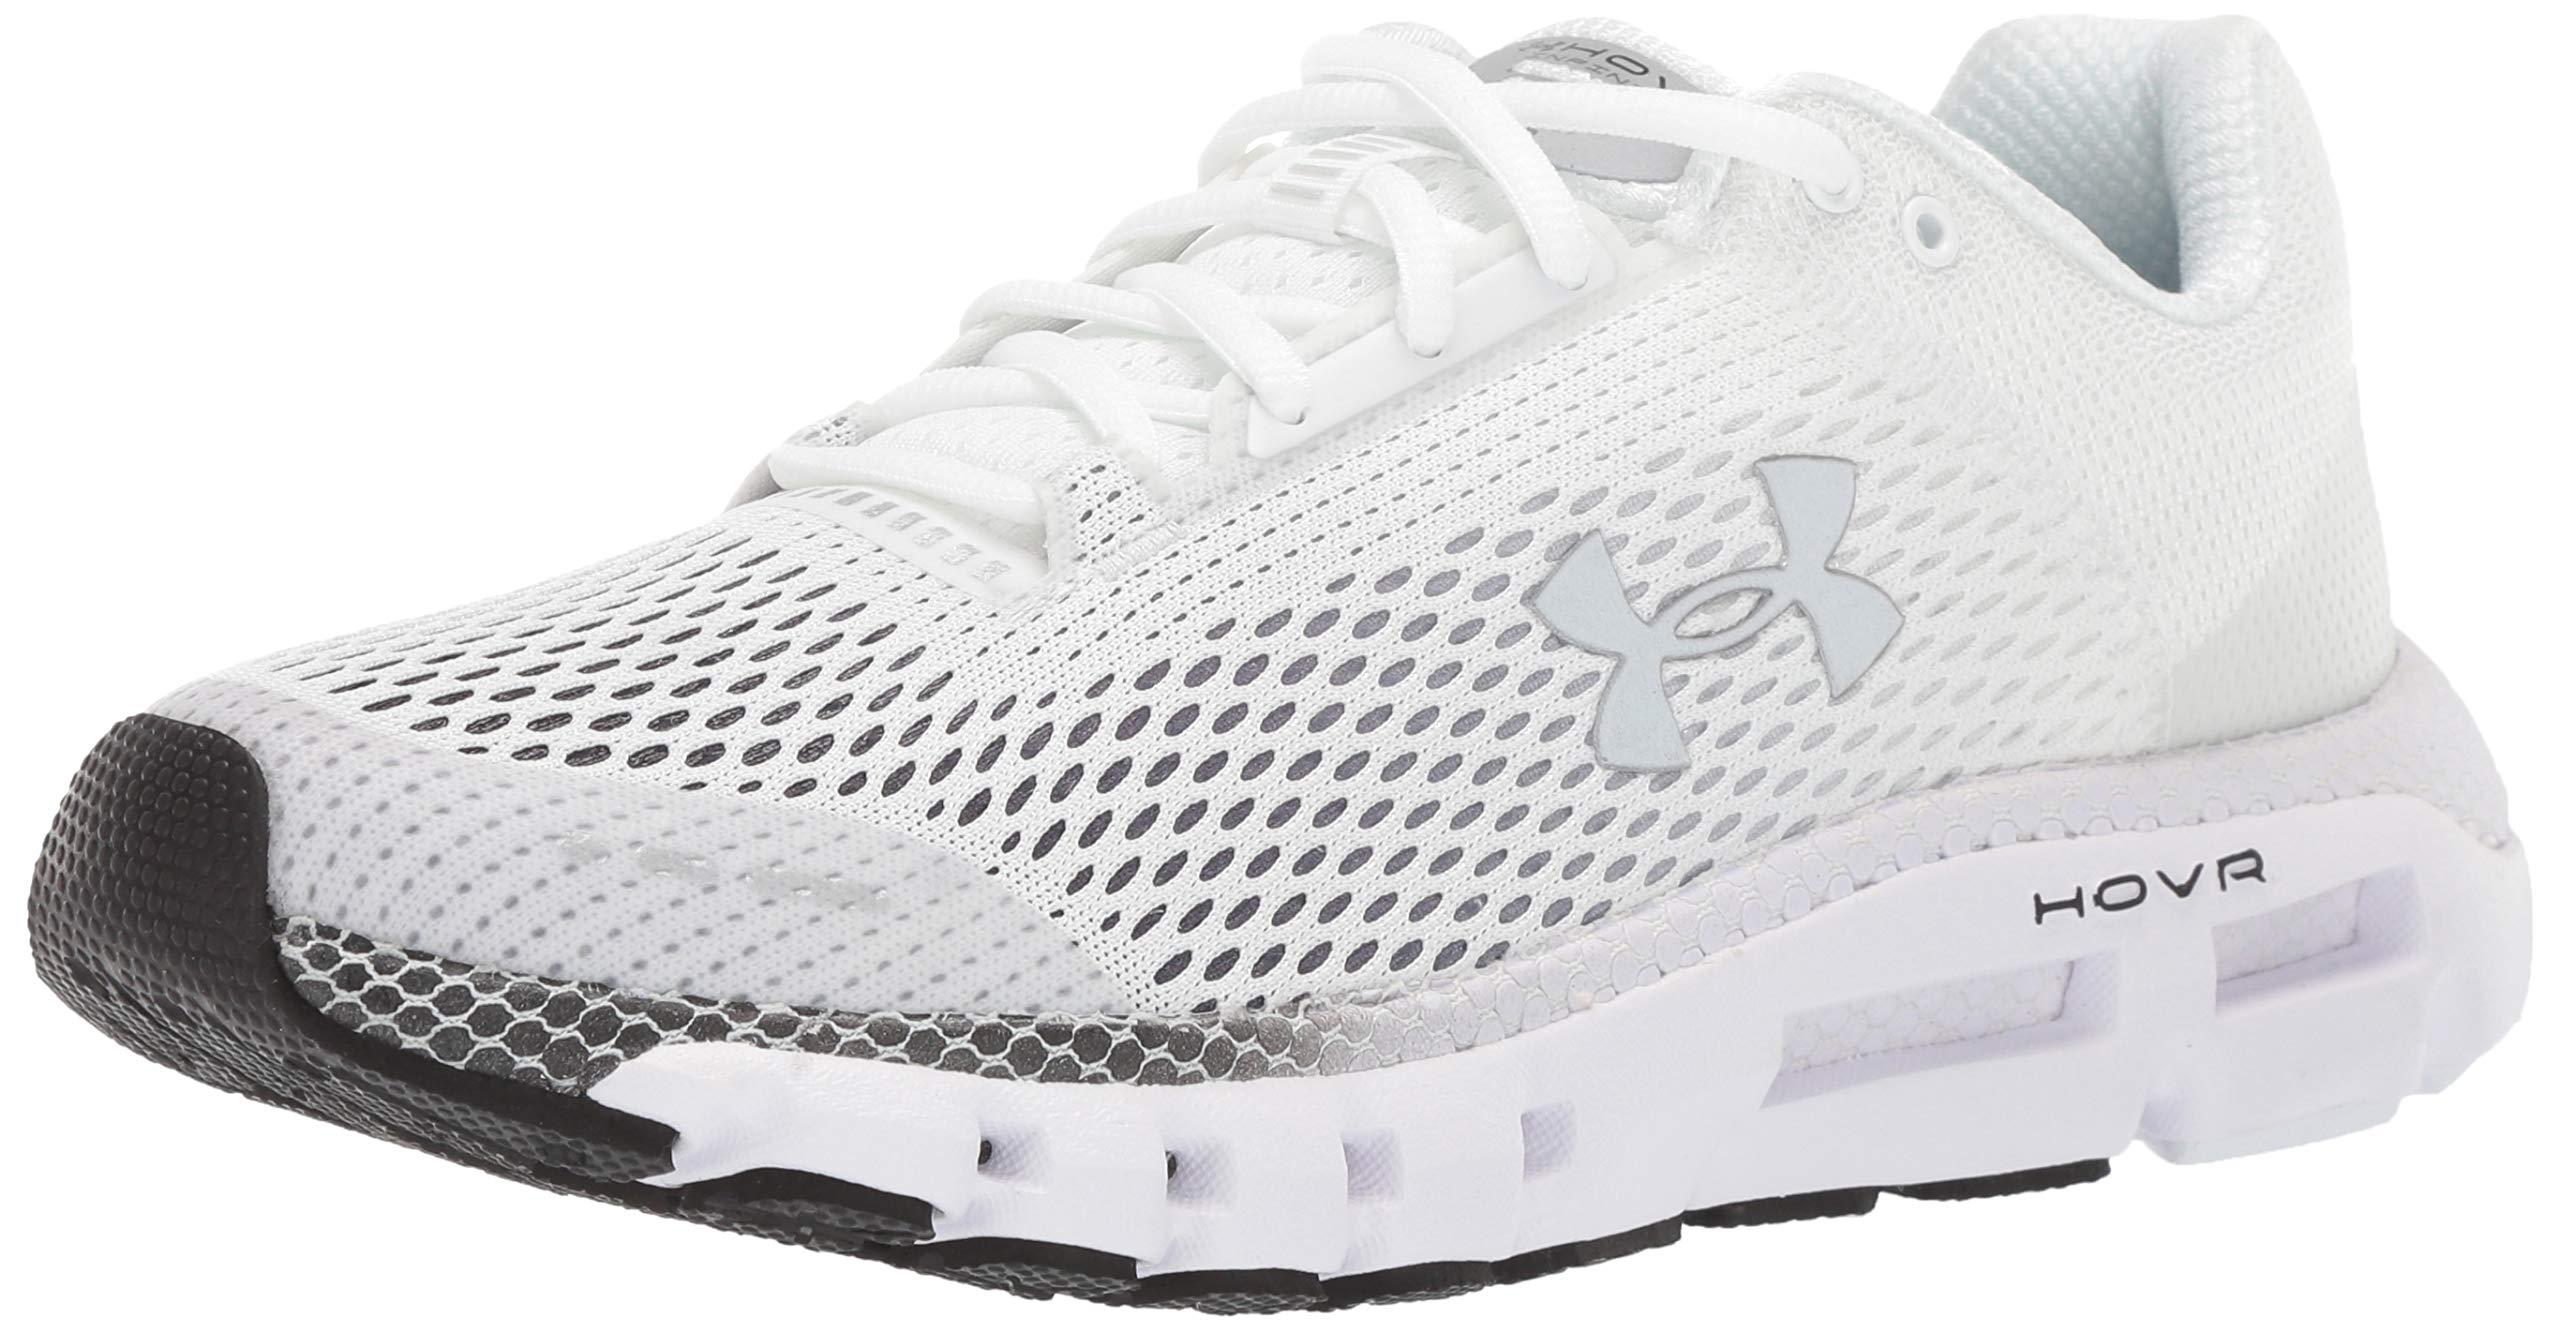 Under Armour Rubber Hovr Infinite Running Shoe in White for Men - Save 32%  - Lyst